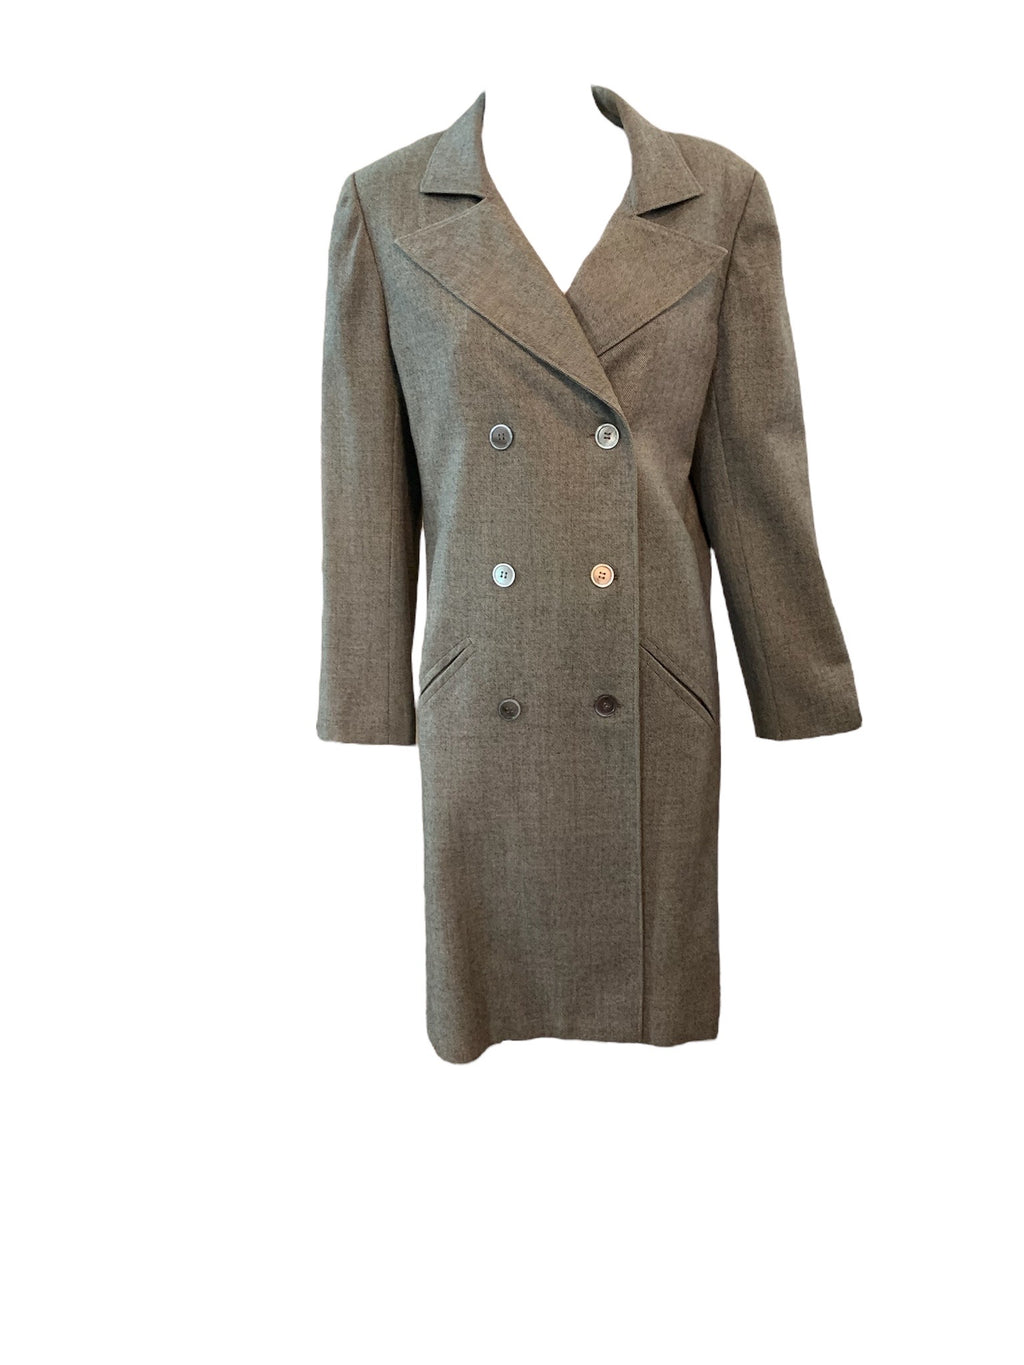 Chloe 70s Grey/Brown Wool Double Breasted Overcoat CLOSED FRONT 1 of 6